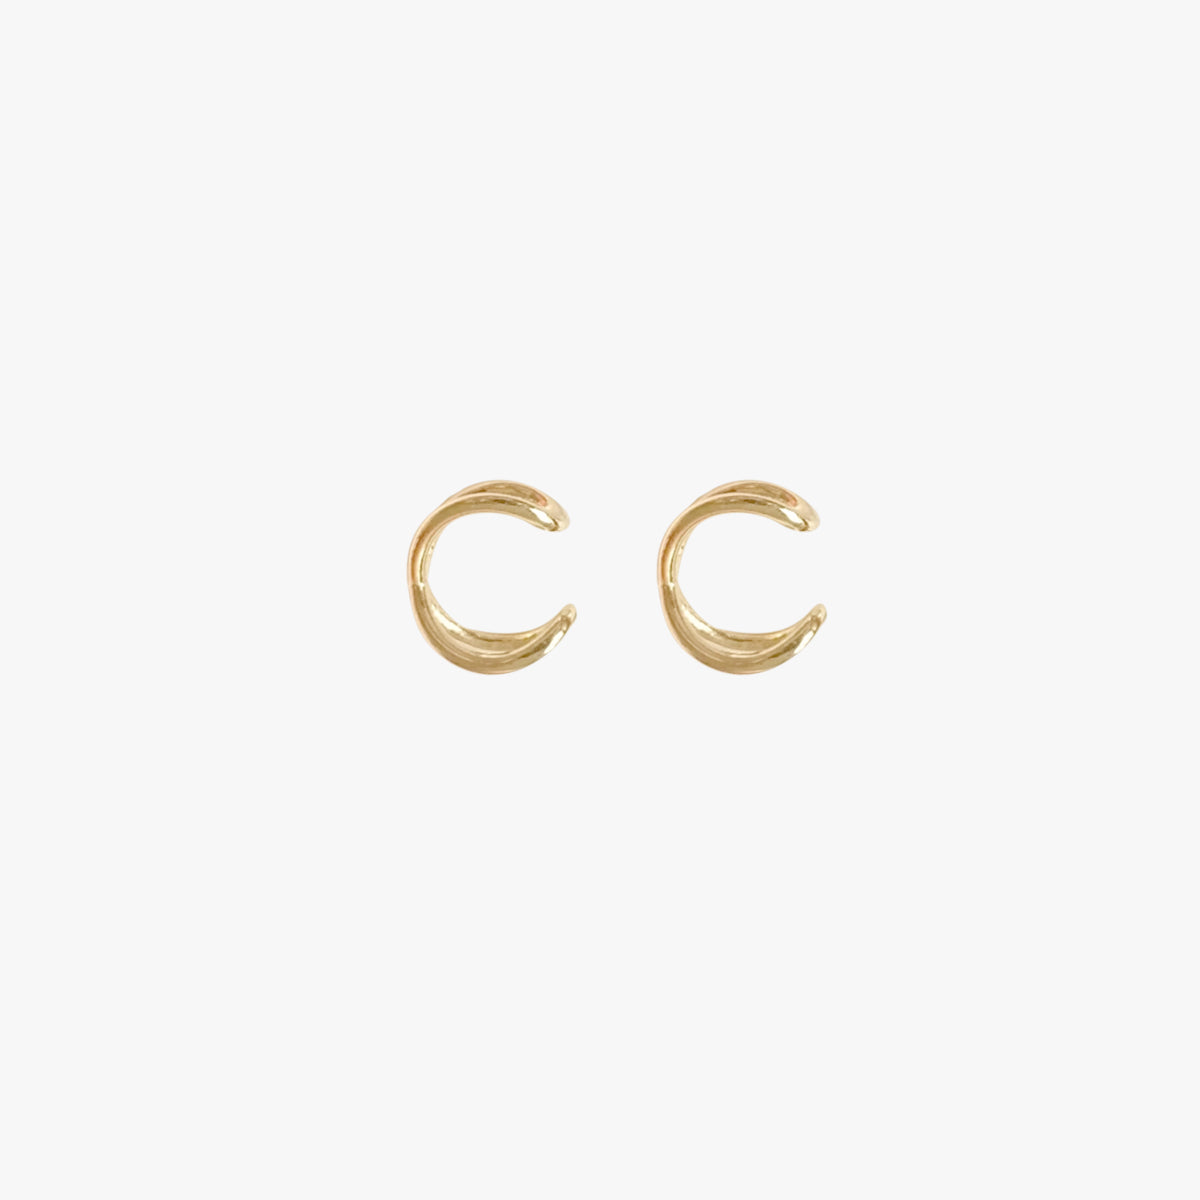 The Crissa Ear Cuff in Solid Gold